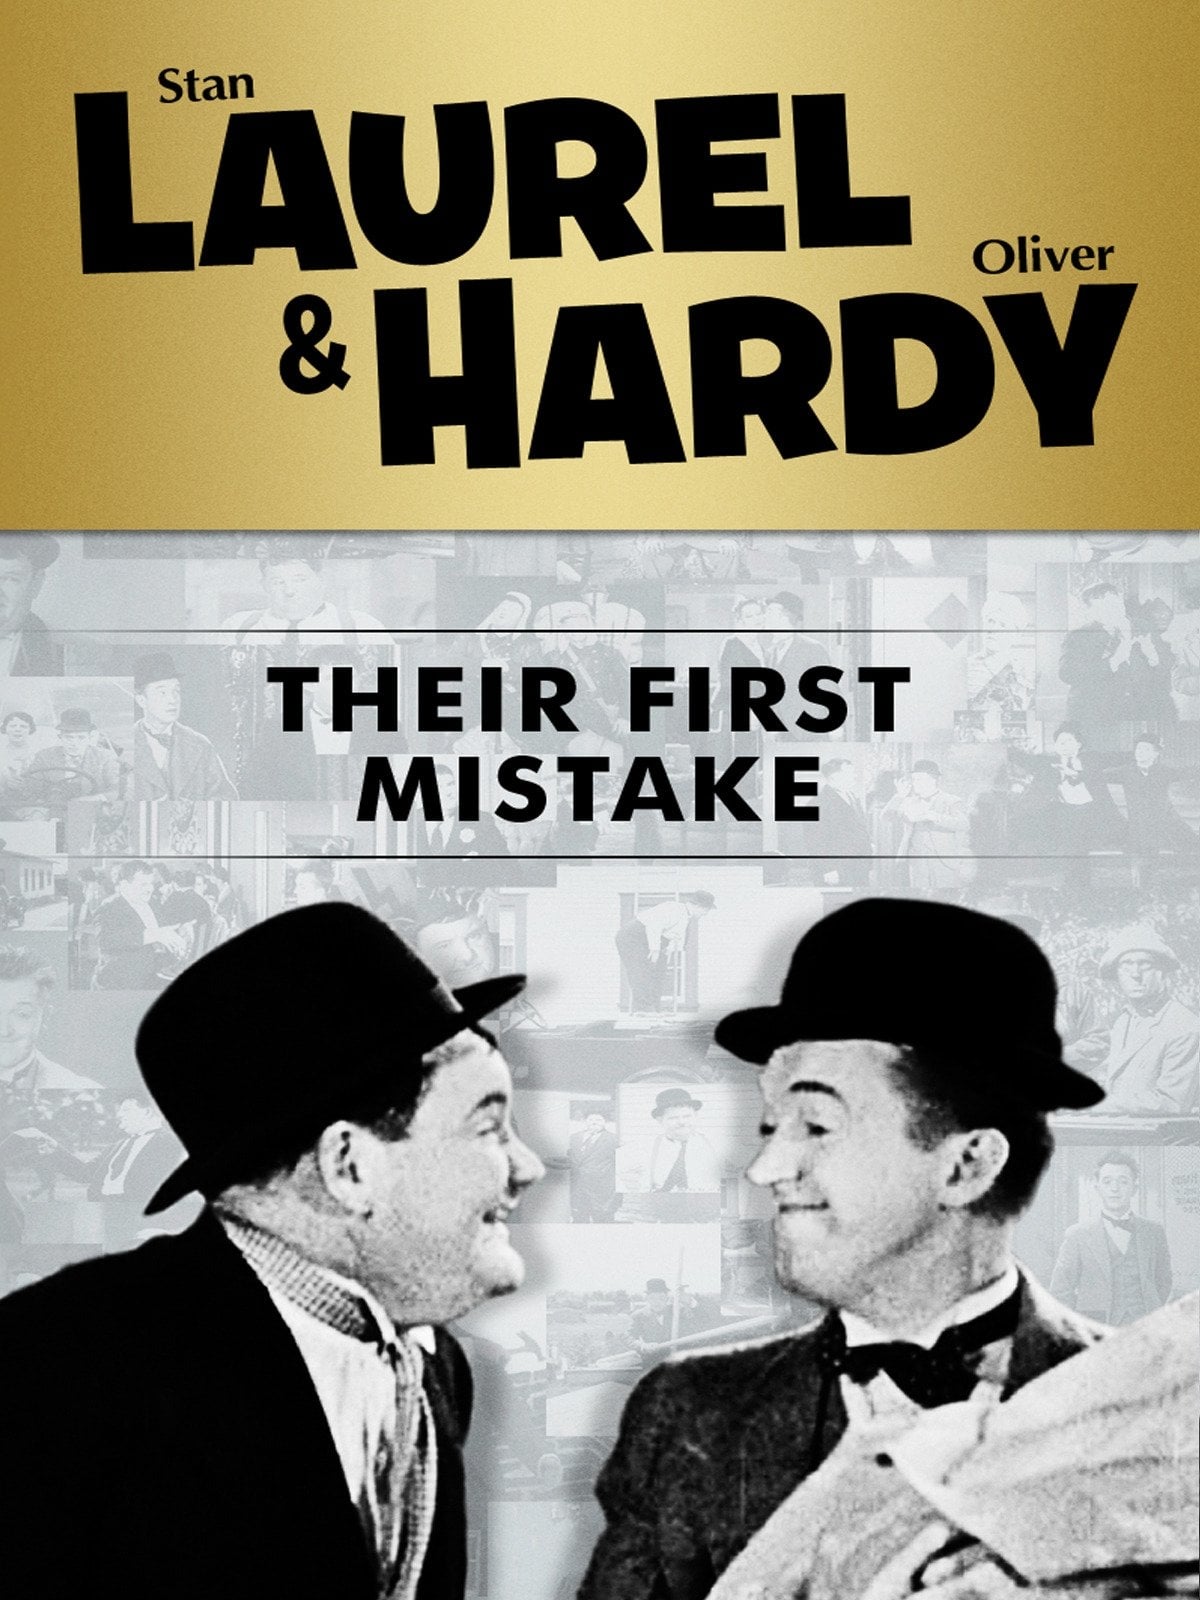 Poster for the movie "Their First Mistake"